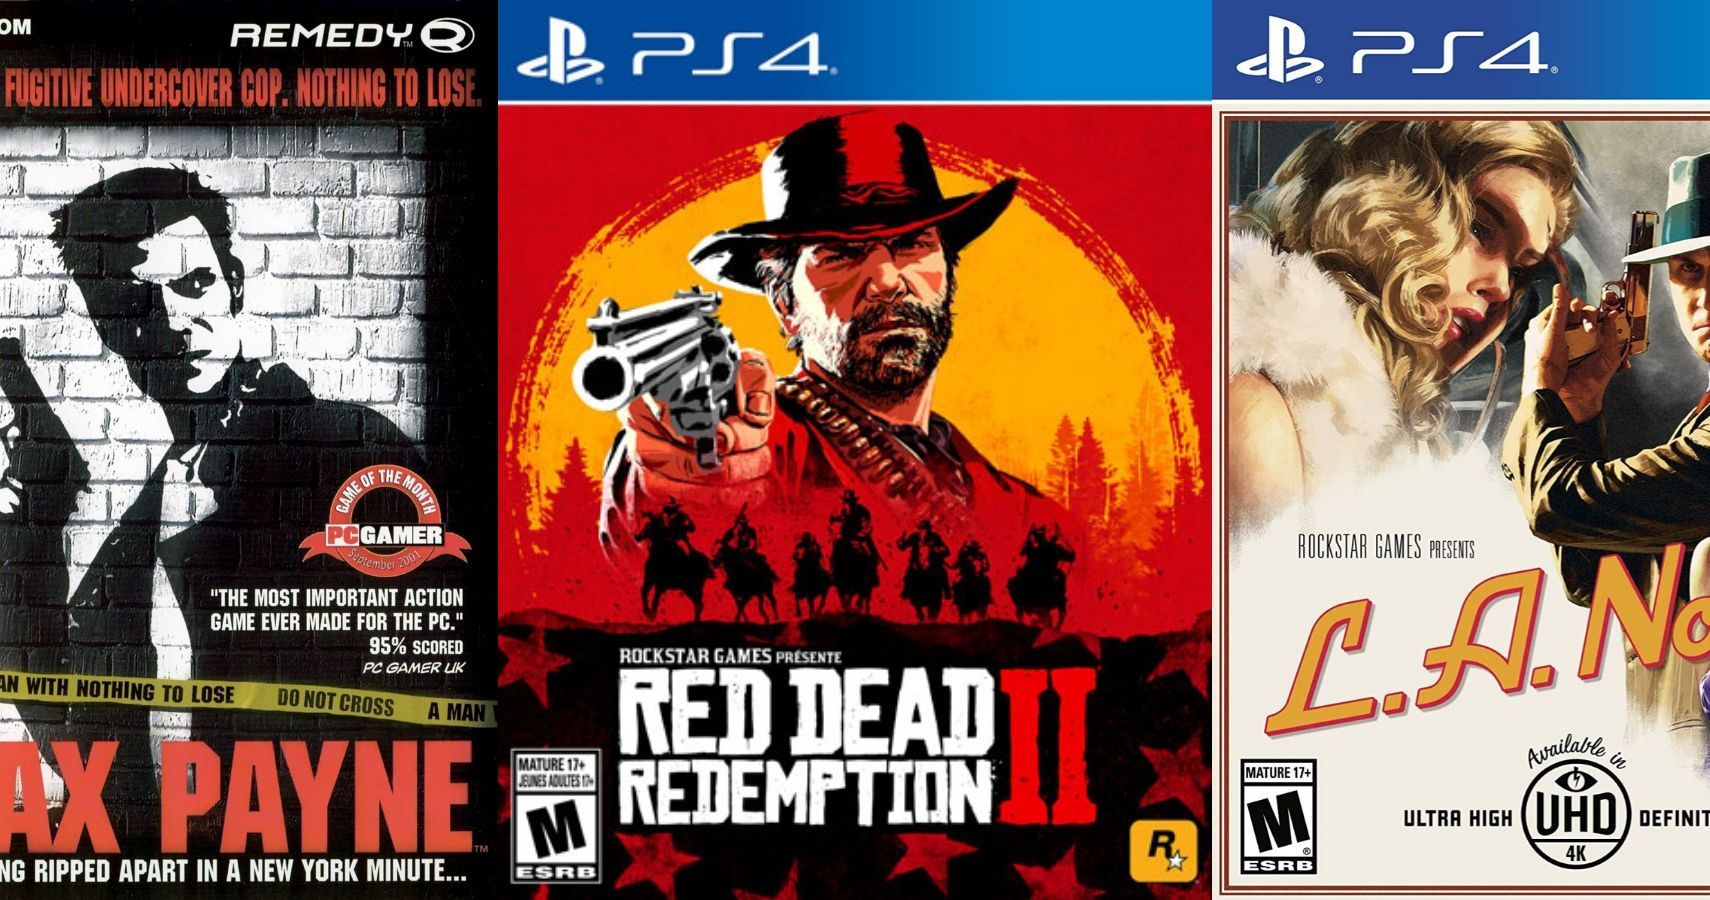 First-Person Shooters on X: Red Dead Redemption 2 (by Rockstar North /  Leeds / London 🇬🇧 Rockstar San Diego / New England 🇺🇸 Rockstar Toronto  🇨🇦 Rockstar India 🇮🇳, 2018). #FPS #TPS #